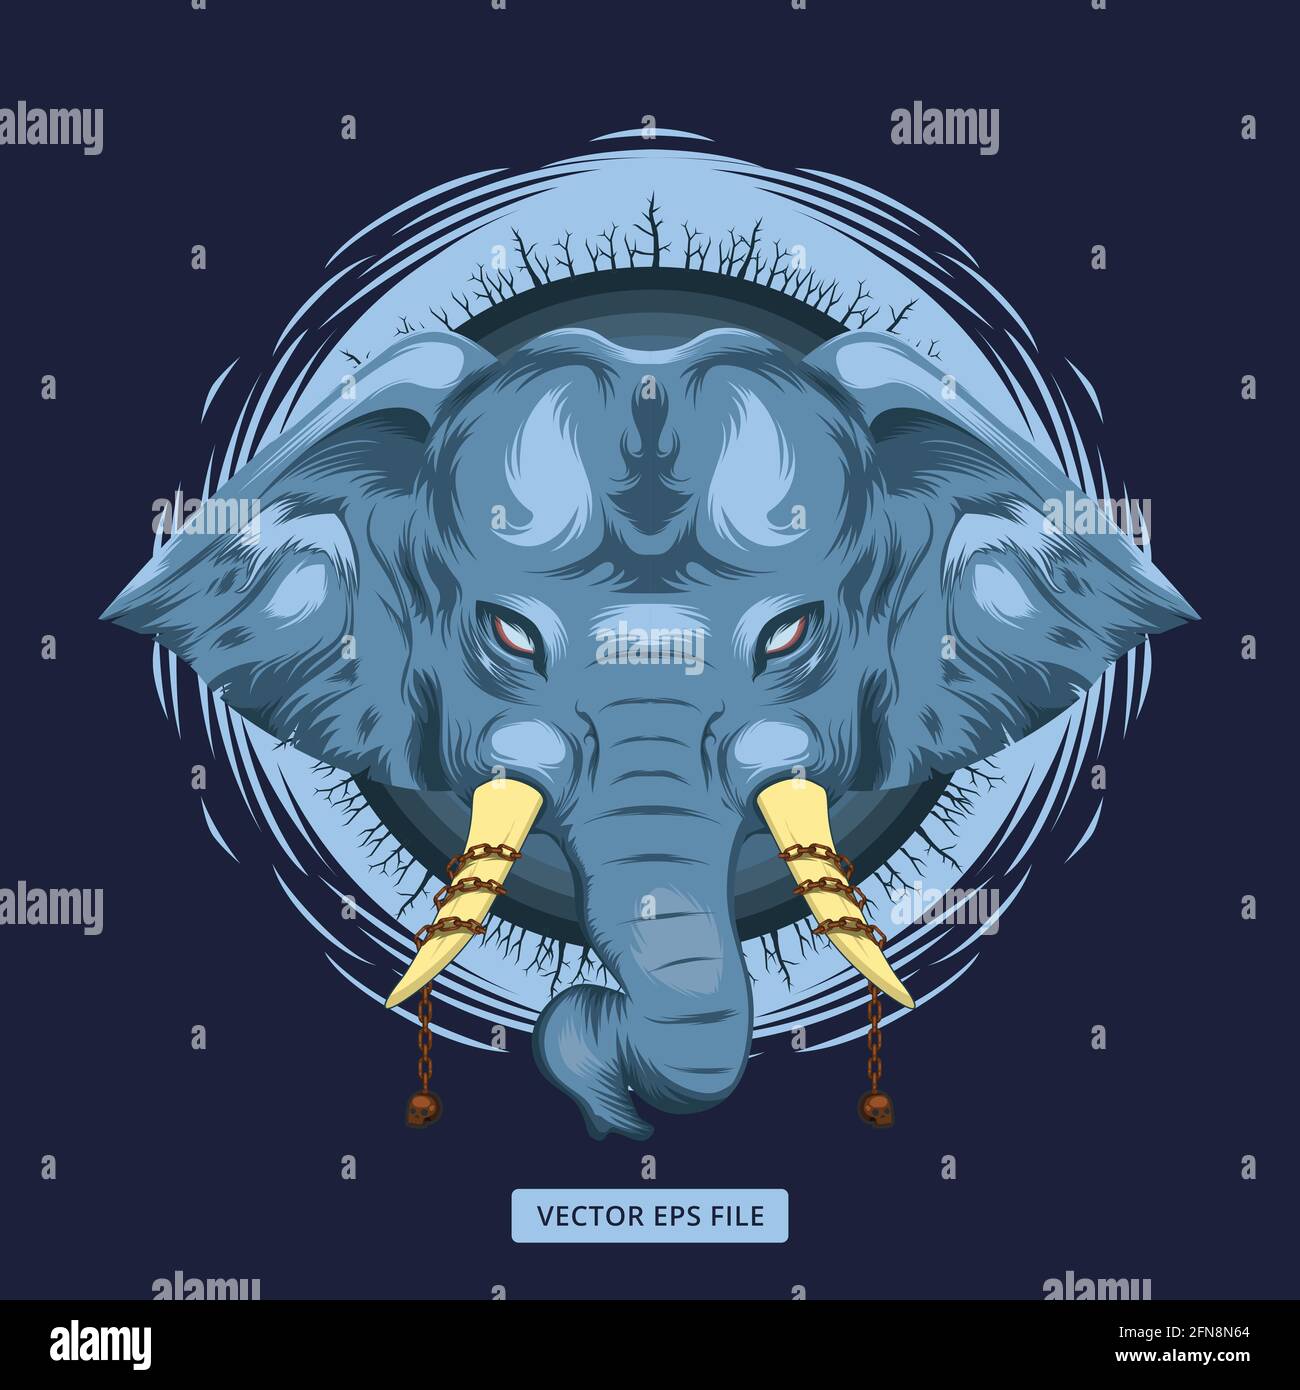 Mythical blue elephant illustration with chained skull ivory and dead forest around the head on dark background vector Stock Vector